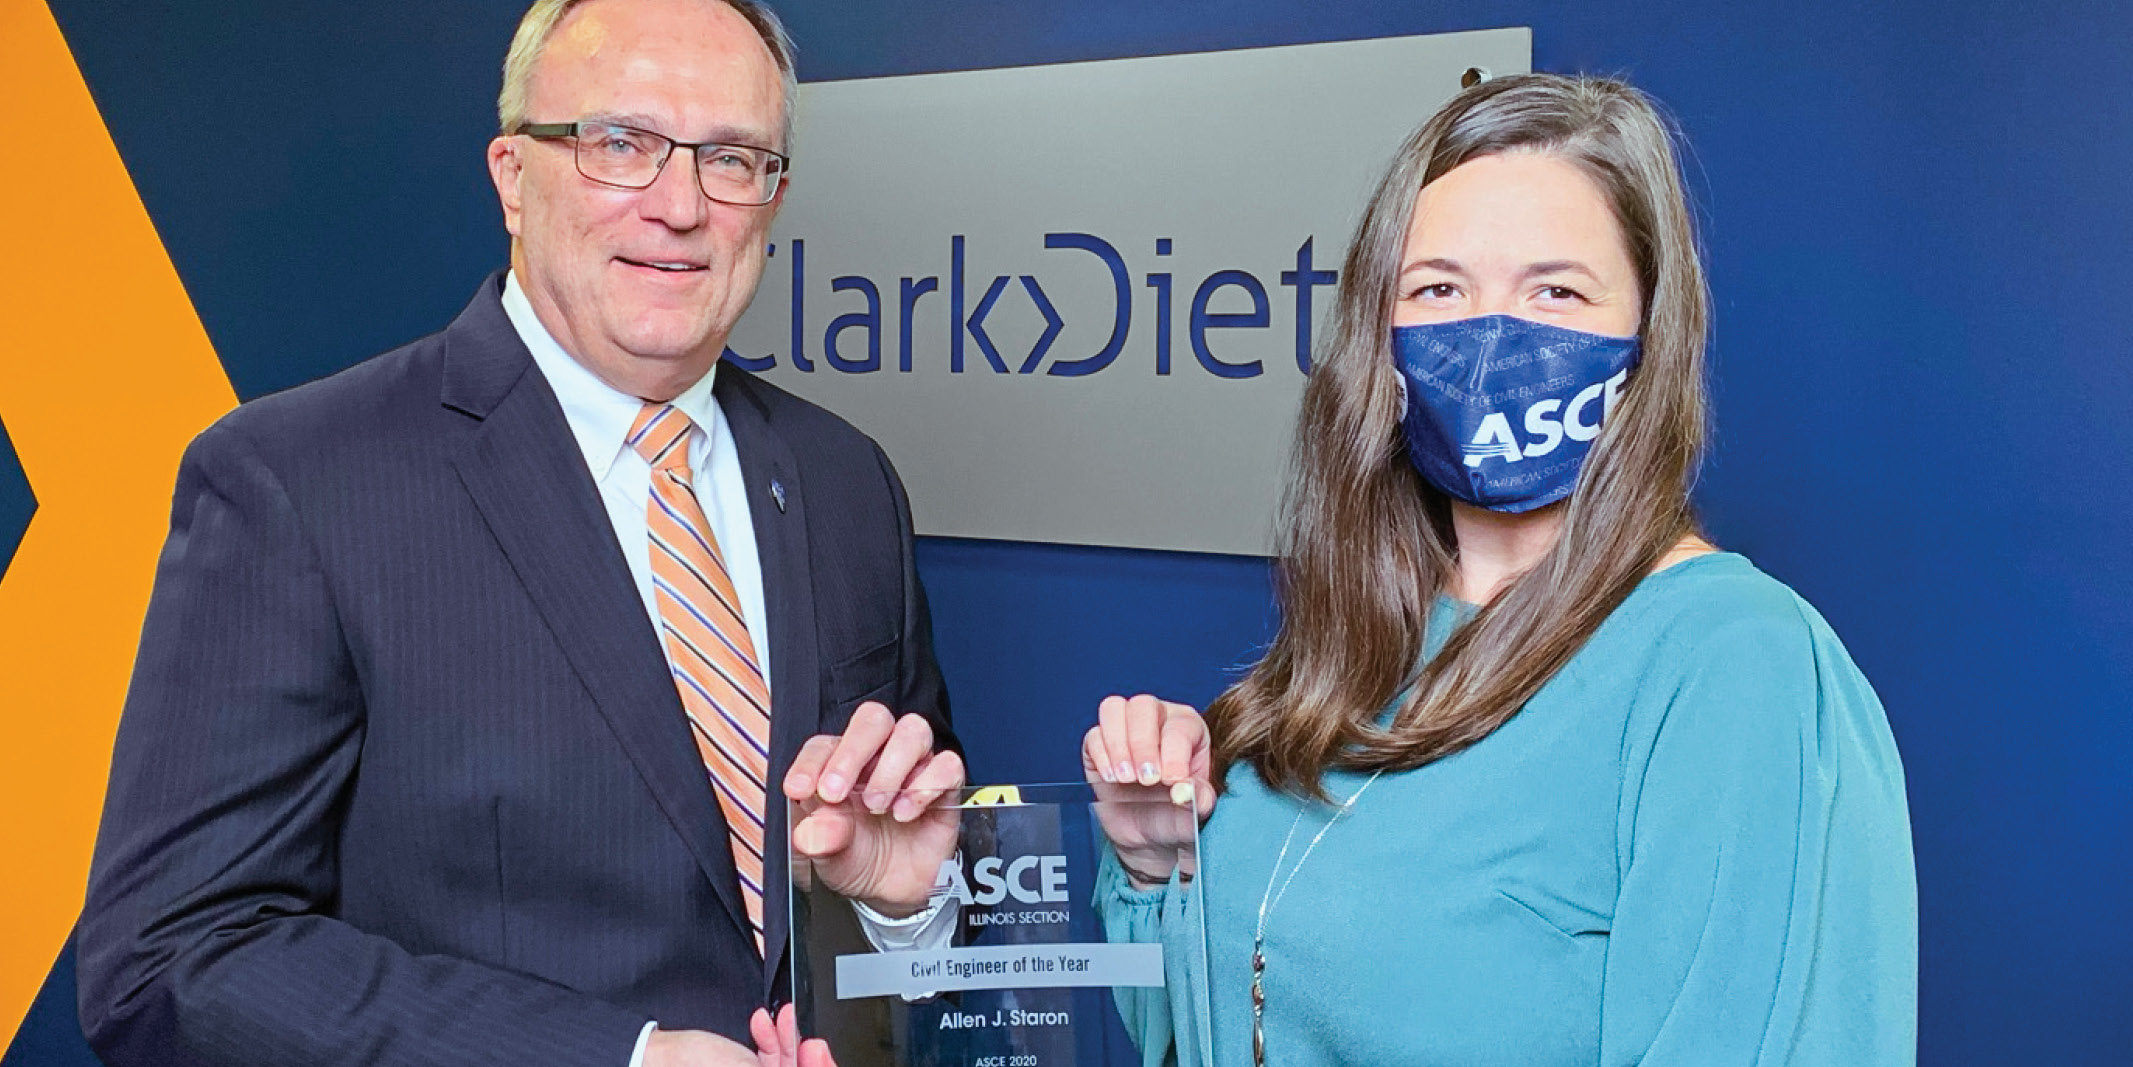 Civil Engineer of the Year: Al Staron is awarded ASCE's Civil Engineer of the Year Award